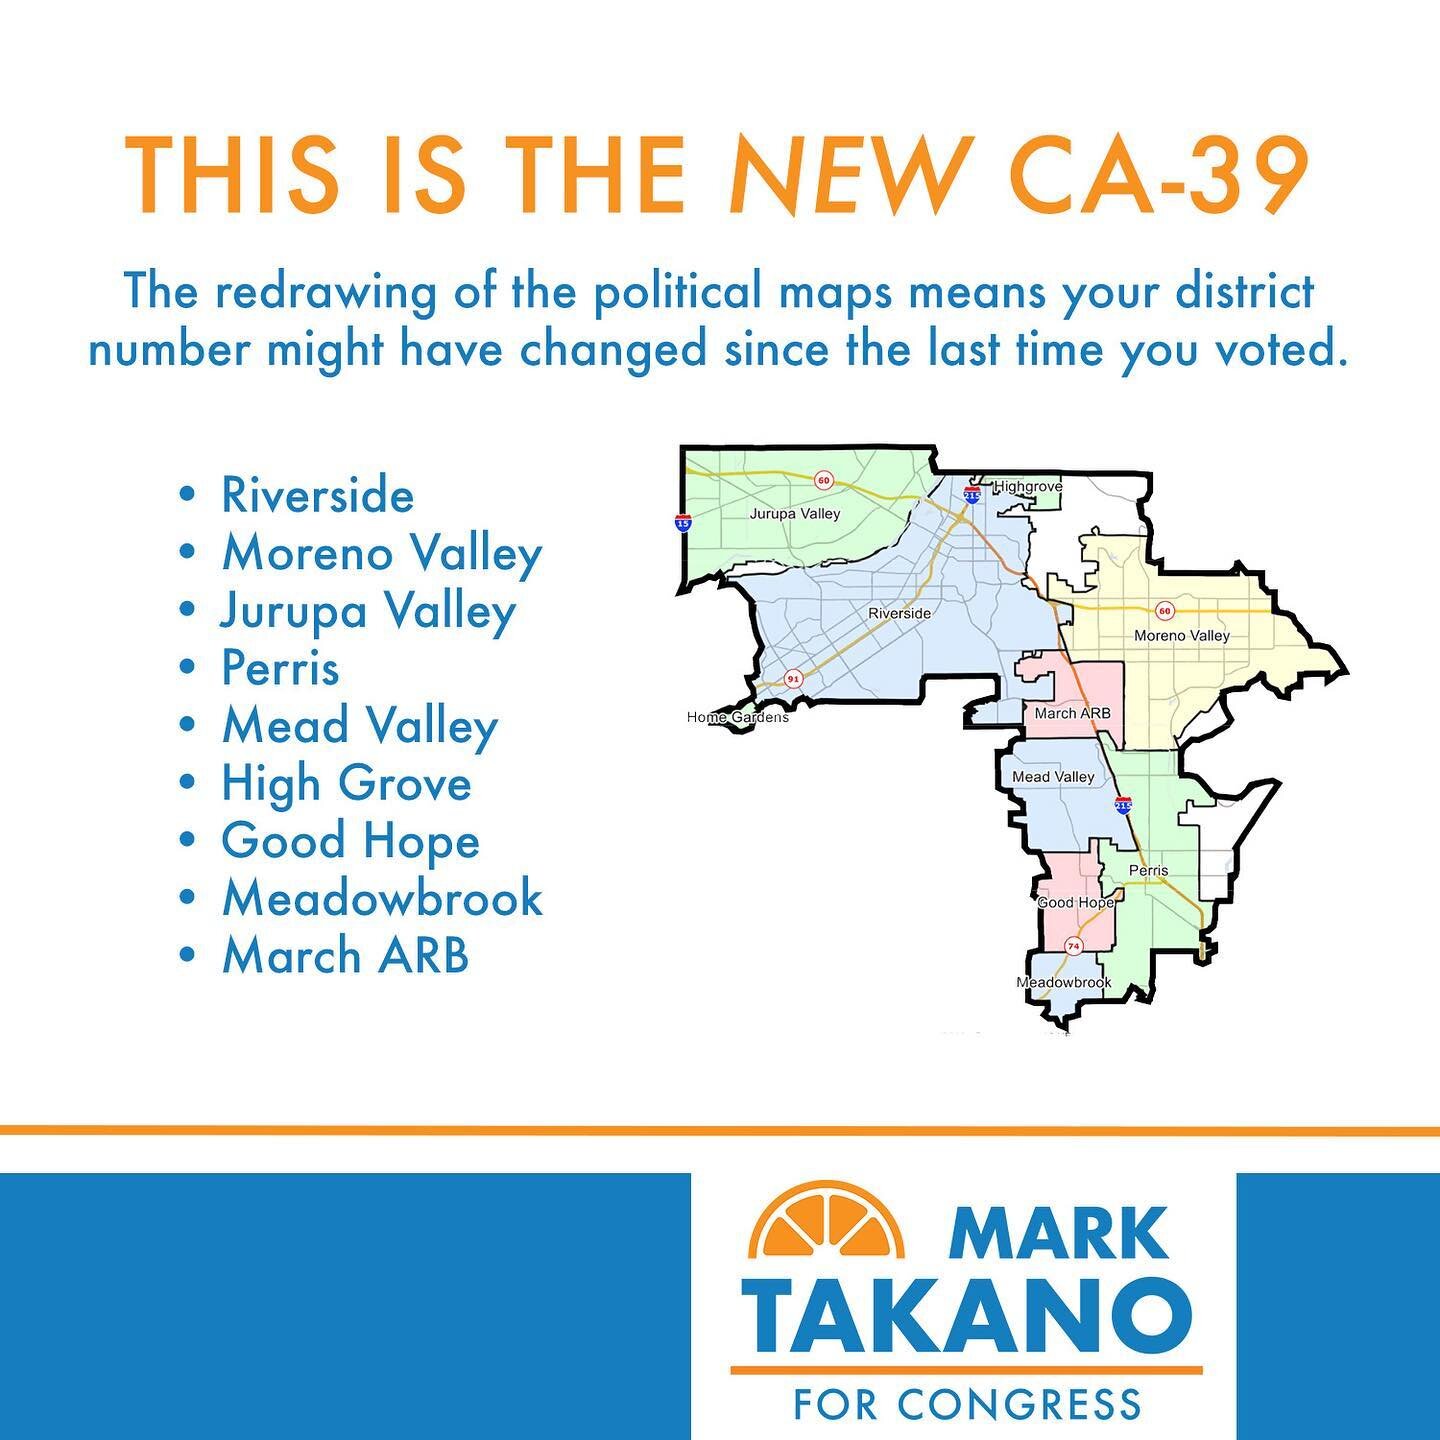 Our political map didn&rsquo;t change much but we did get a new district number, CA-39. With a new district comes a new logo and new yard signs. Link in bio for details.